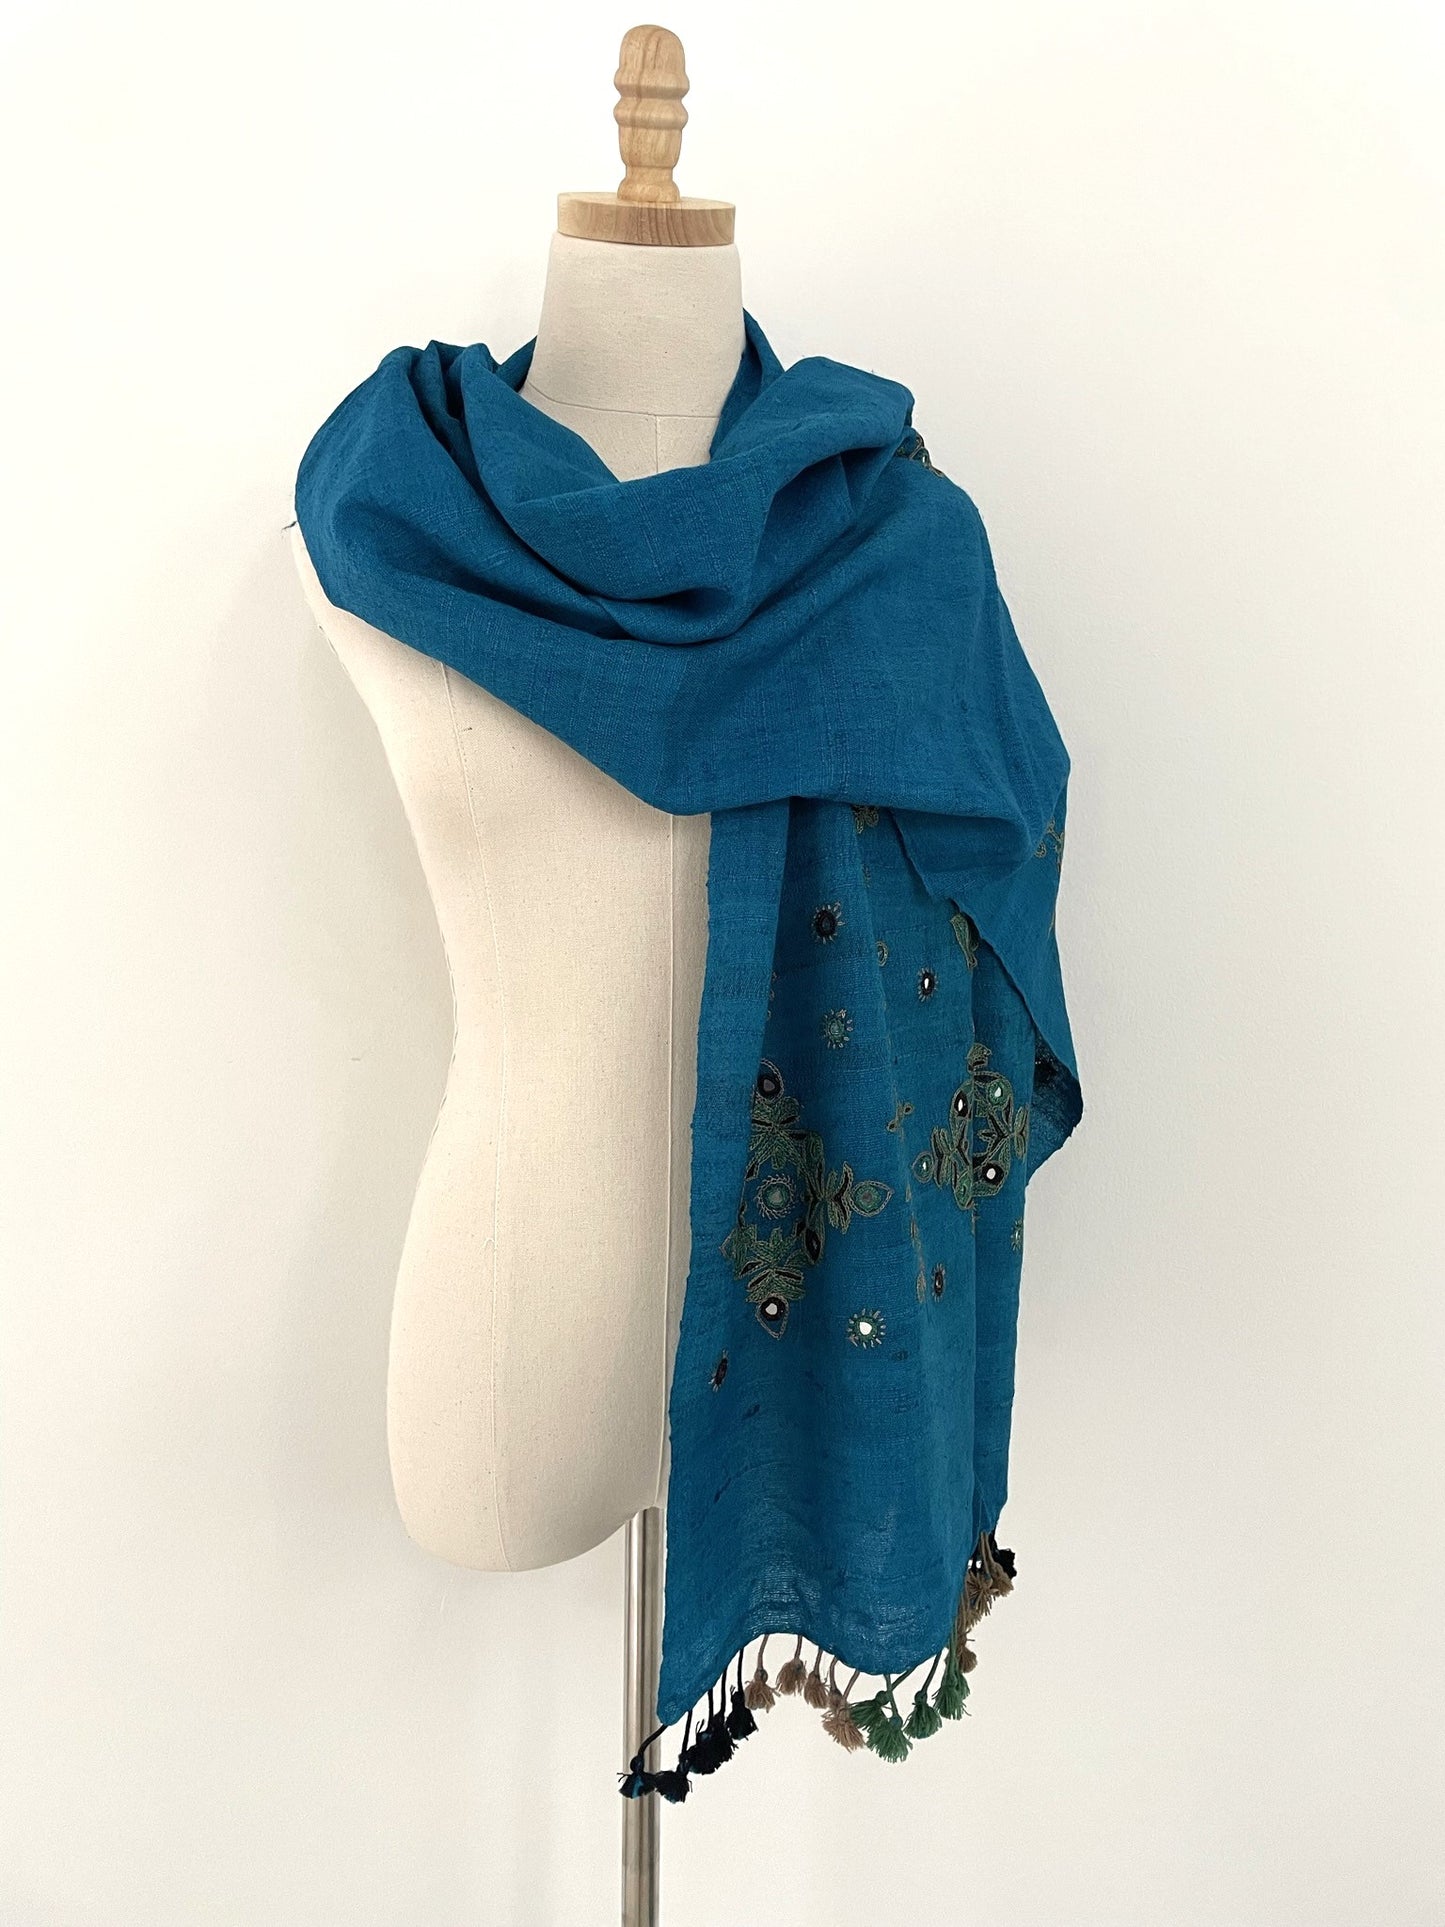 The Fine Embroidered Wool Scarf in Deep Turquoise with Tassels